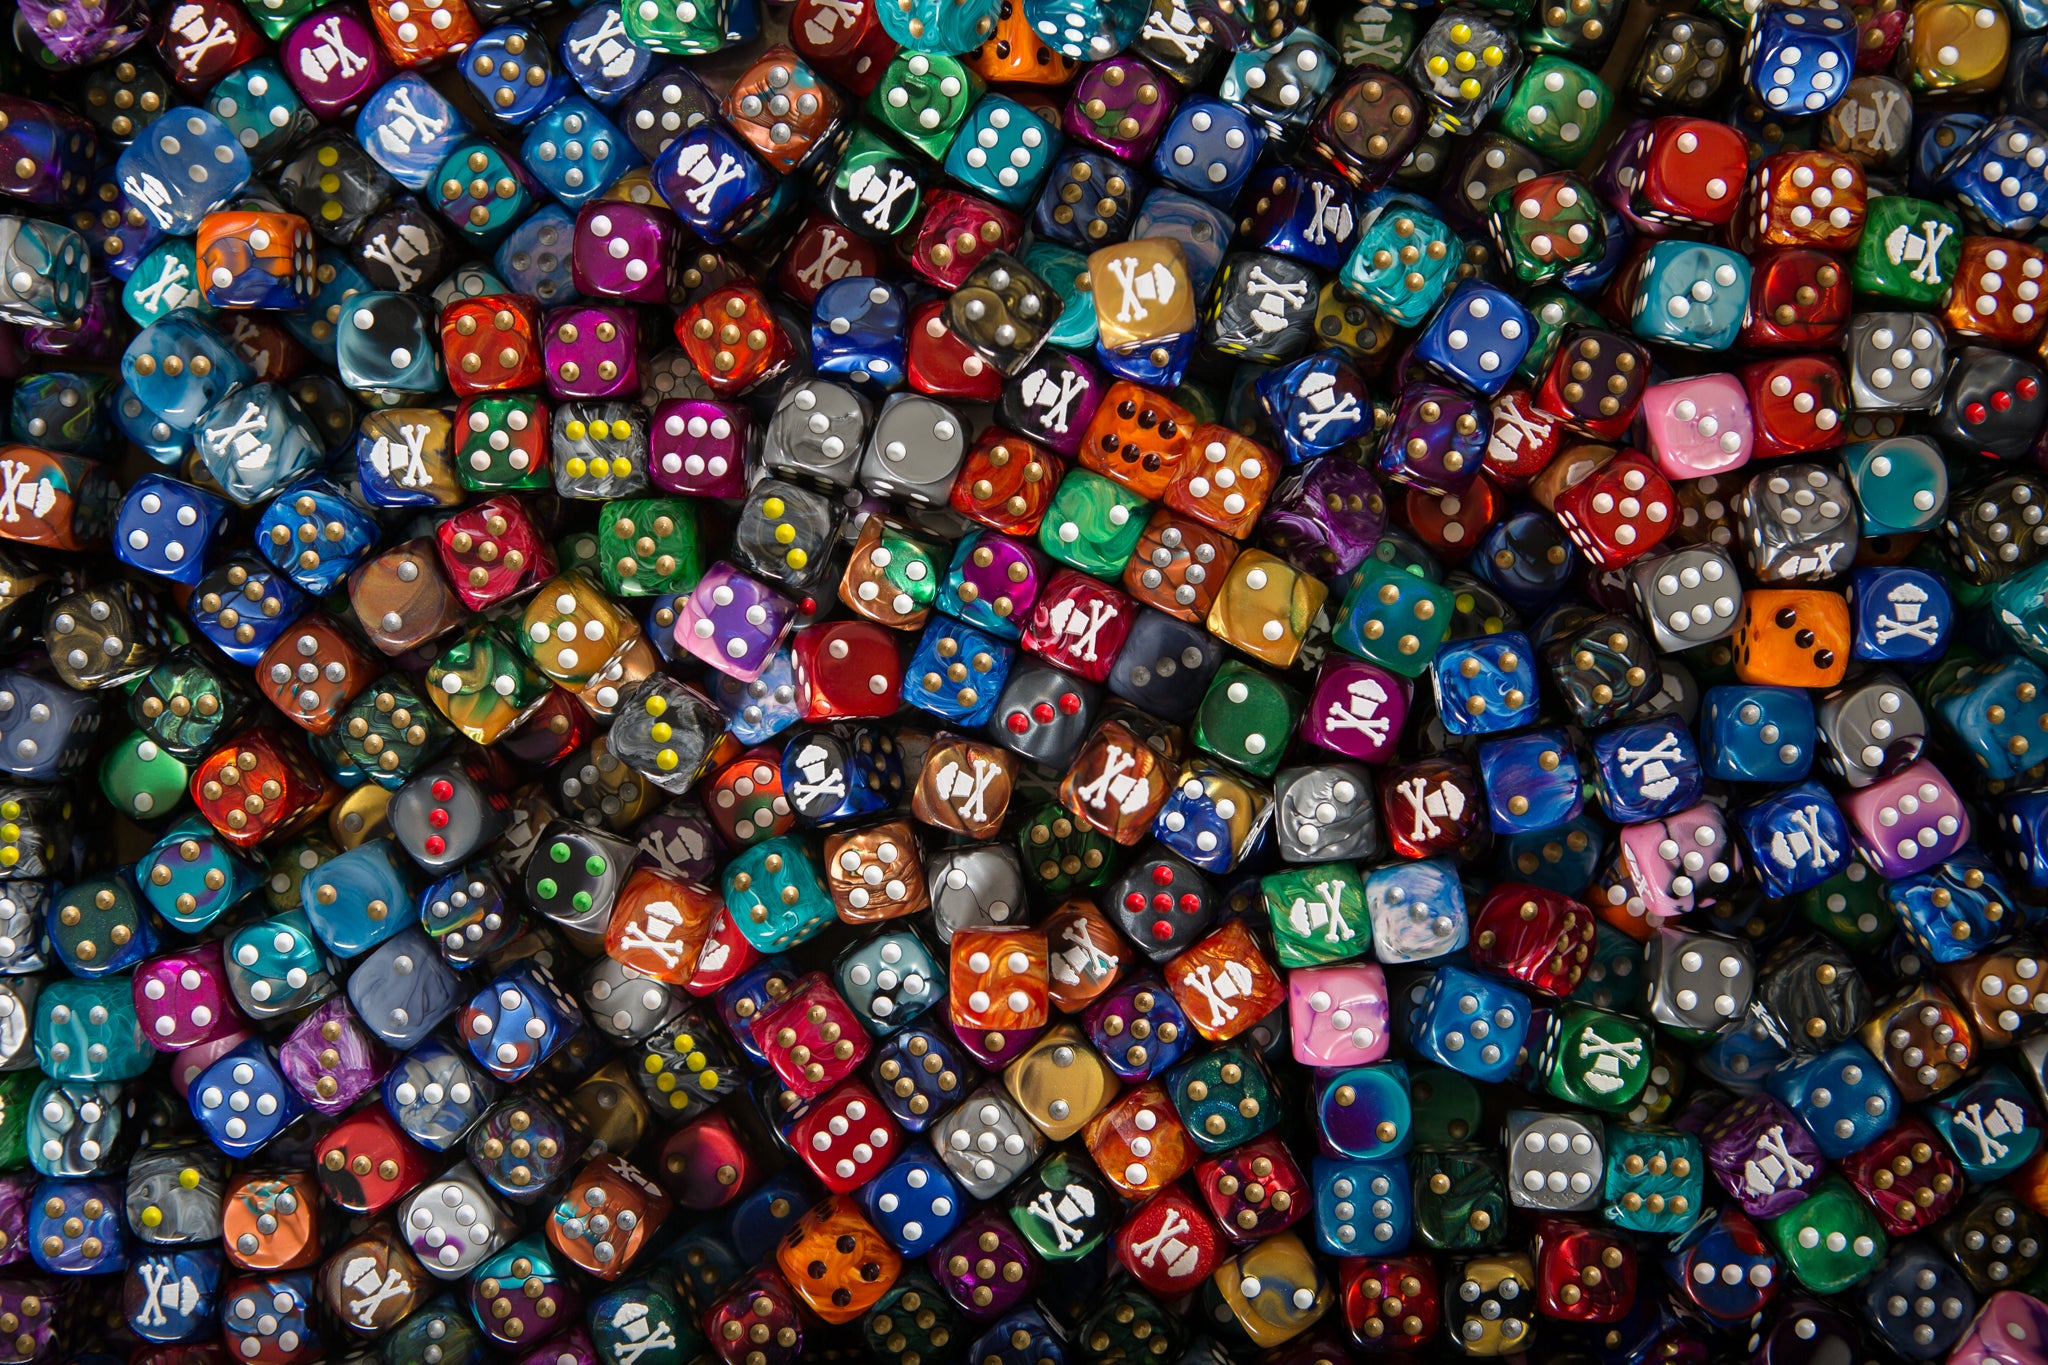 Back-Alley Dice